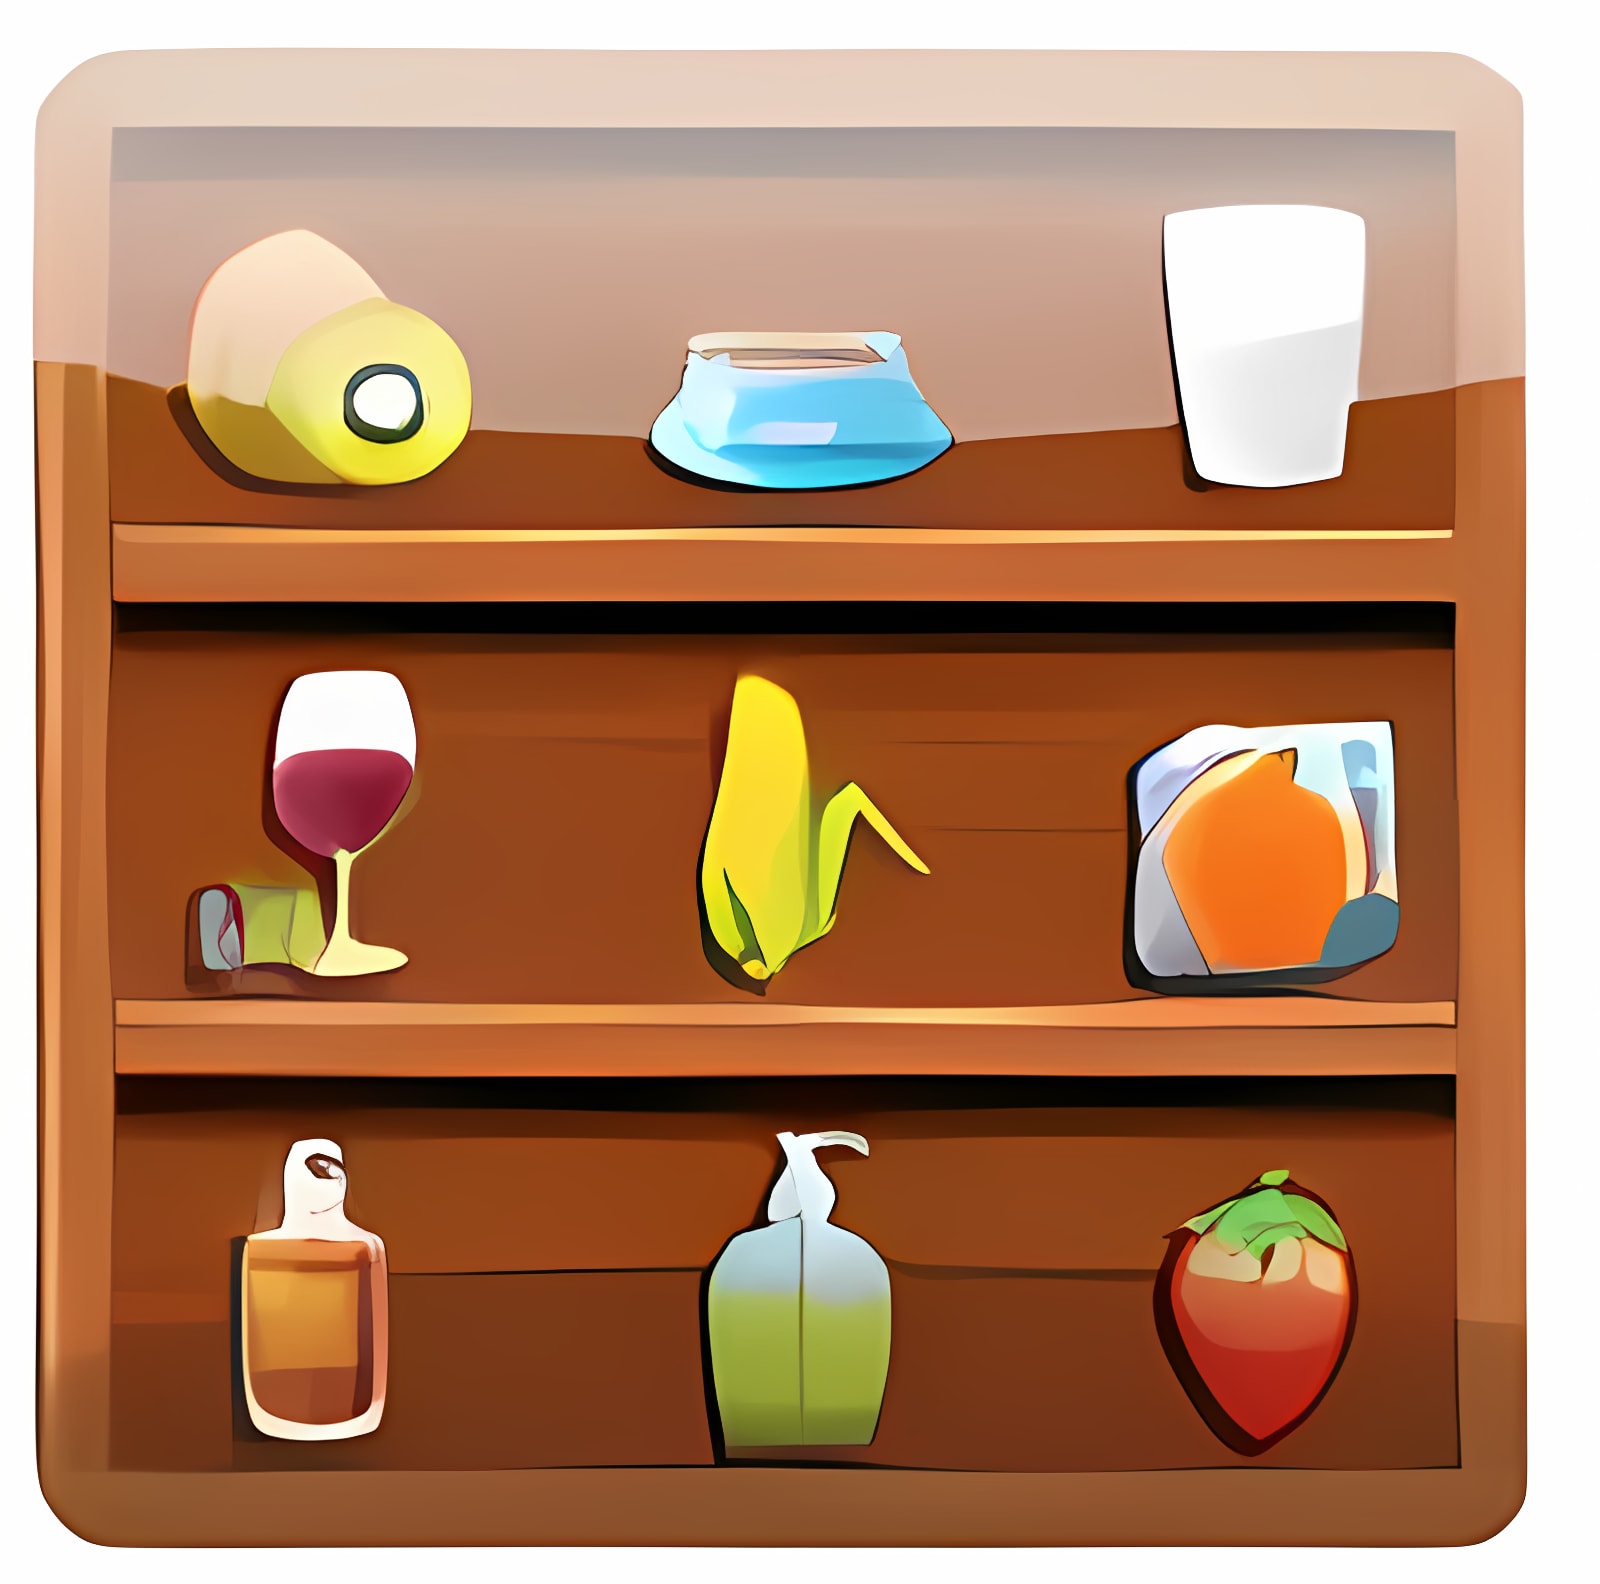 Download Pantry Install Latest App downloader